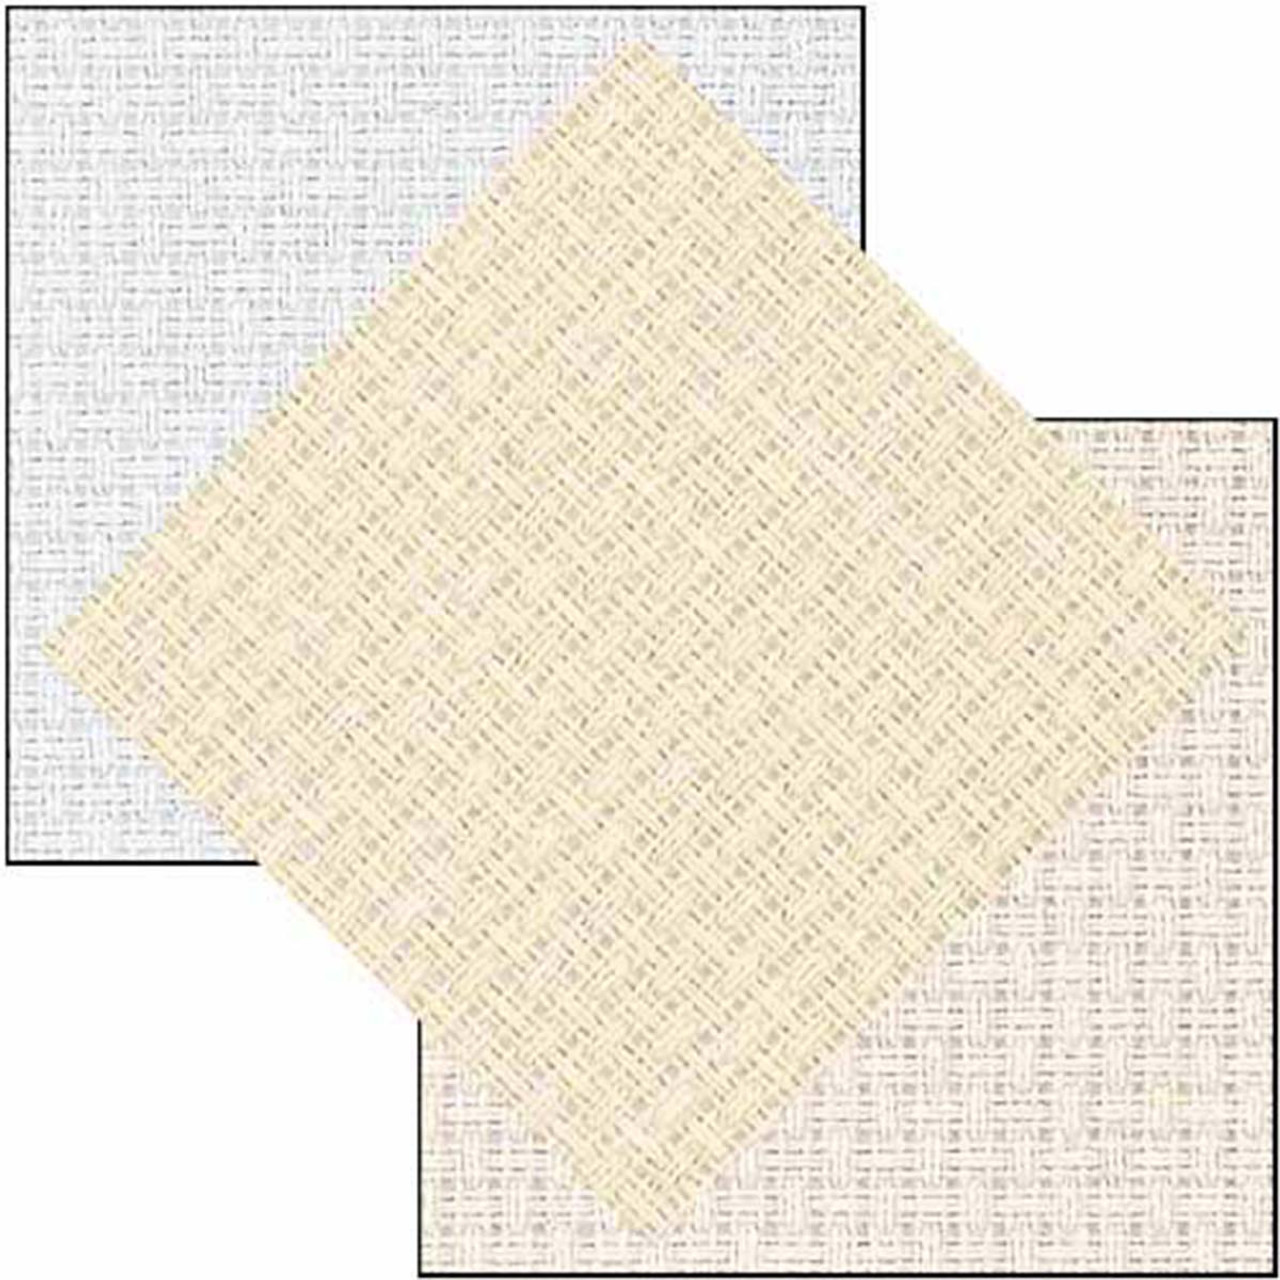 Zweigart Easy Count Fabric - 18 Count Aida : Charting Creations